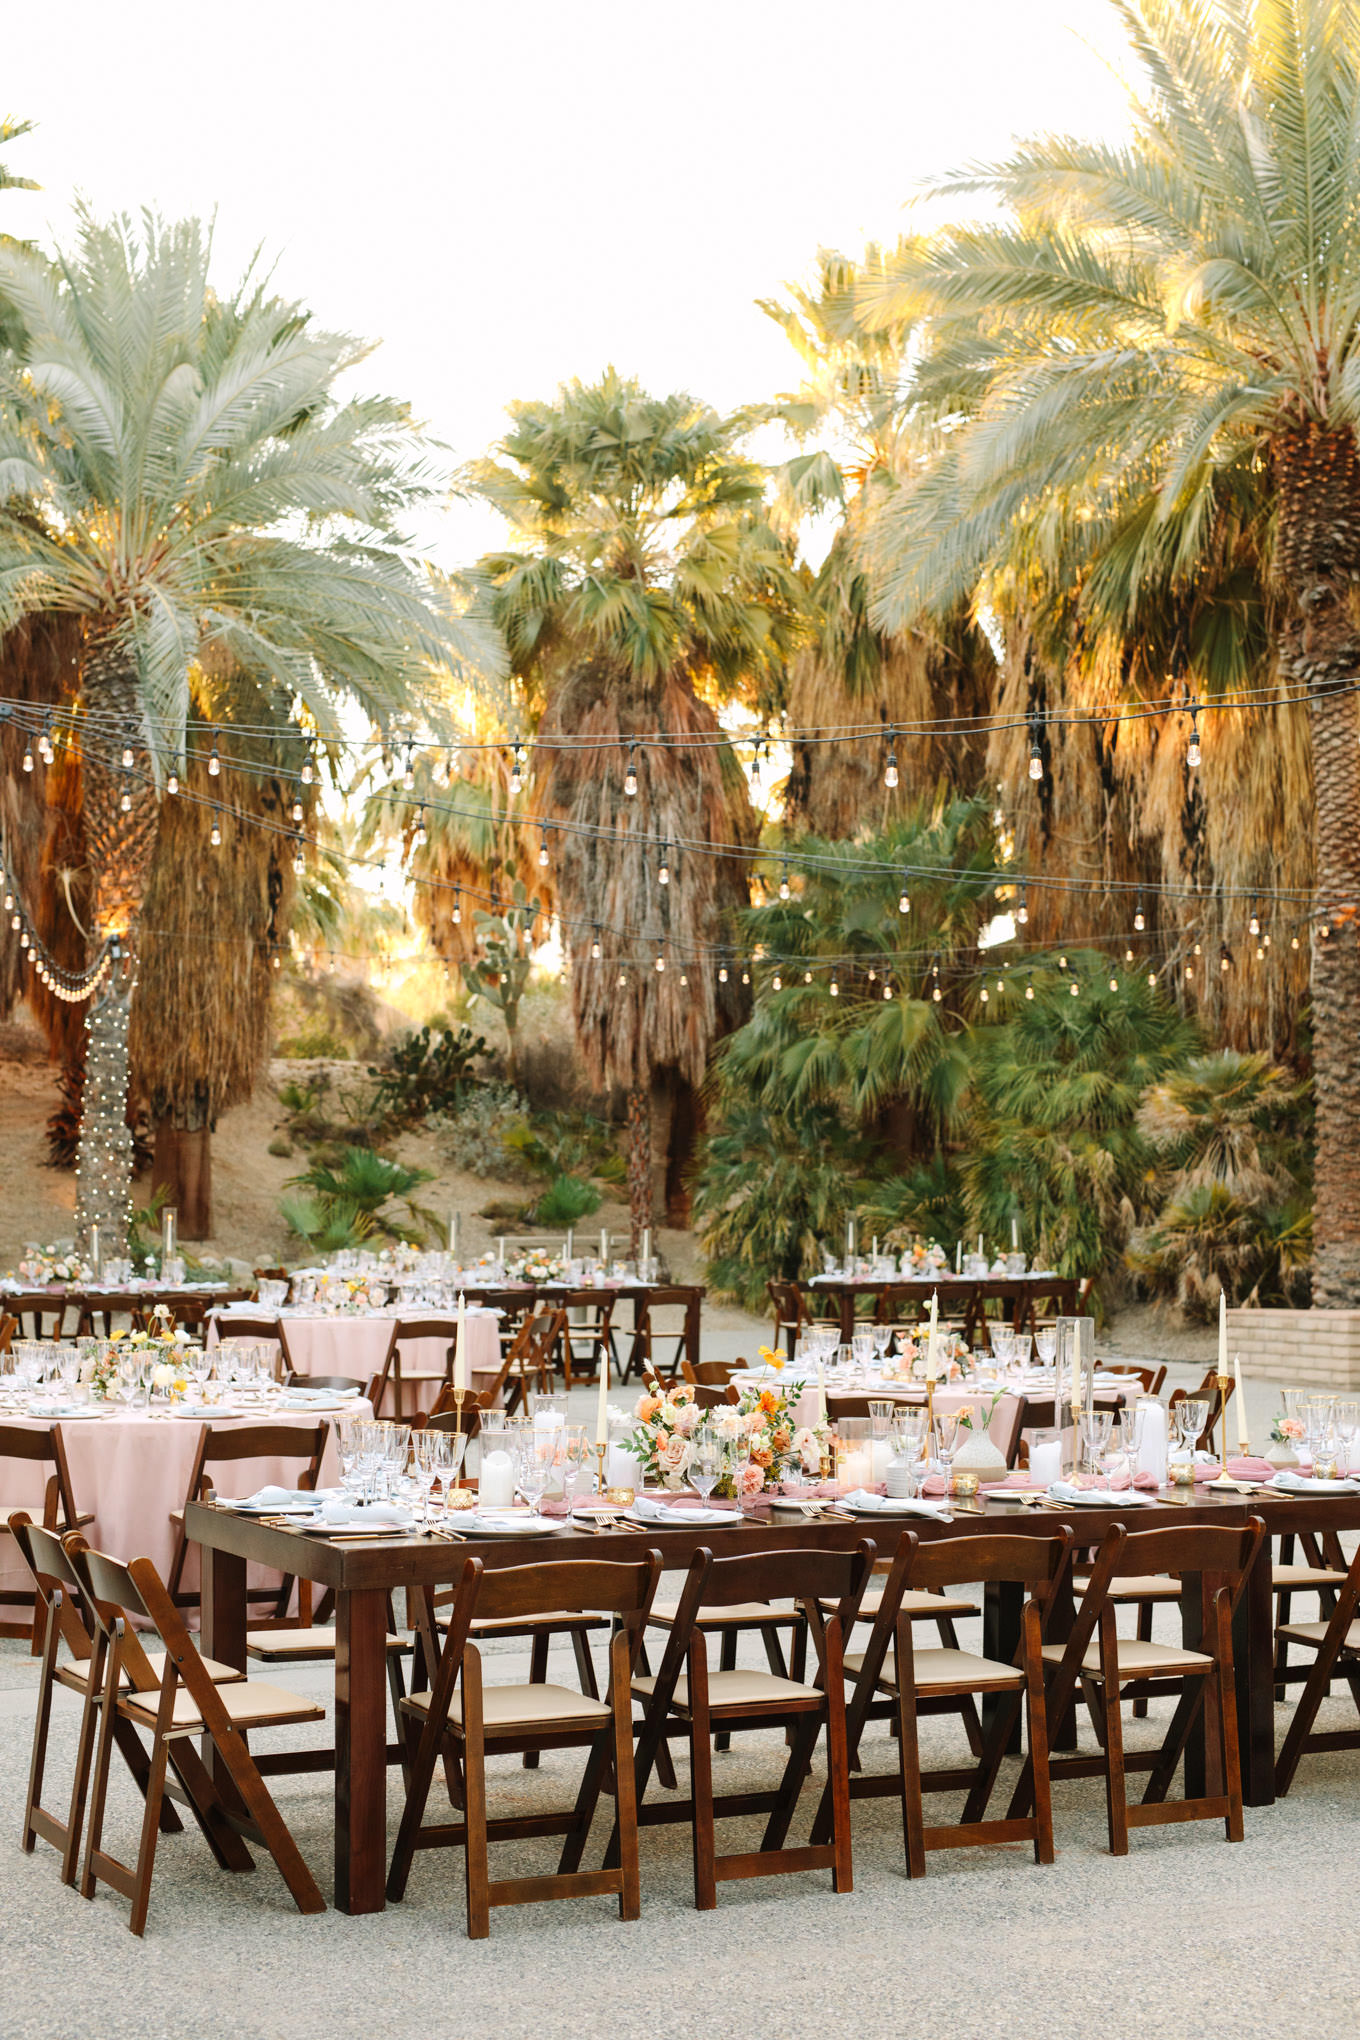 Rectangular table in palm garden | Living Desert Zoo & Gardens wedding with unique details | Elevated and colorful wedding photography for fun-loving couples in Southern California |  #PalmSprings #palmspringsphotographer #gardenwedding #palmspringswedding  Source: Mary Costa Photography | Los Angeles wedding photographer 